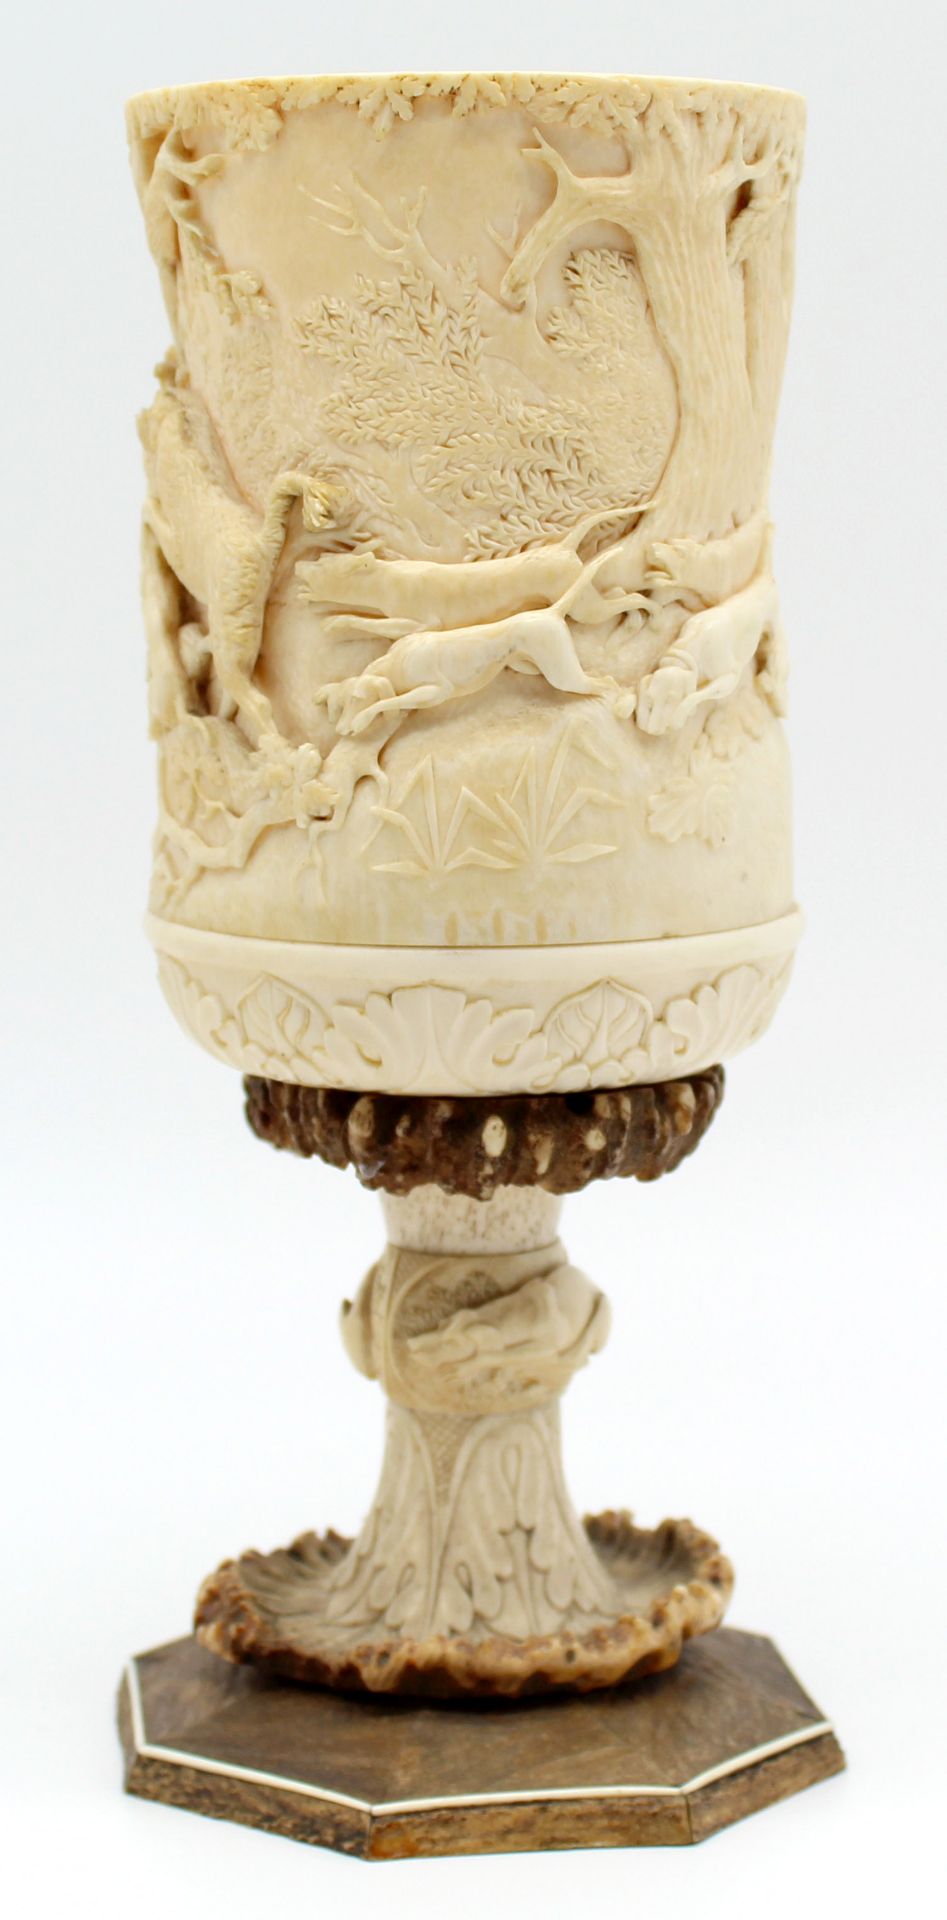 Ivory and stag horn around 1900. Probably Erbach. Hunting trophy. - Image 12 of 16